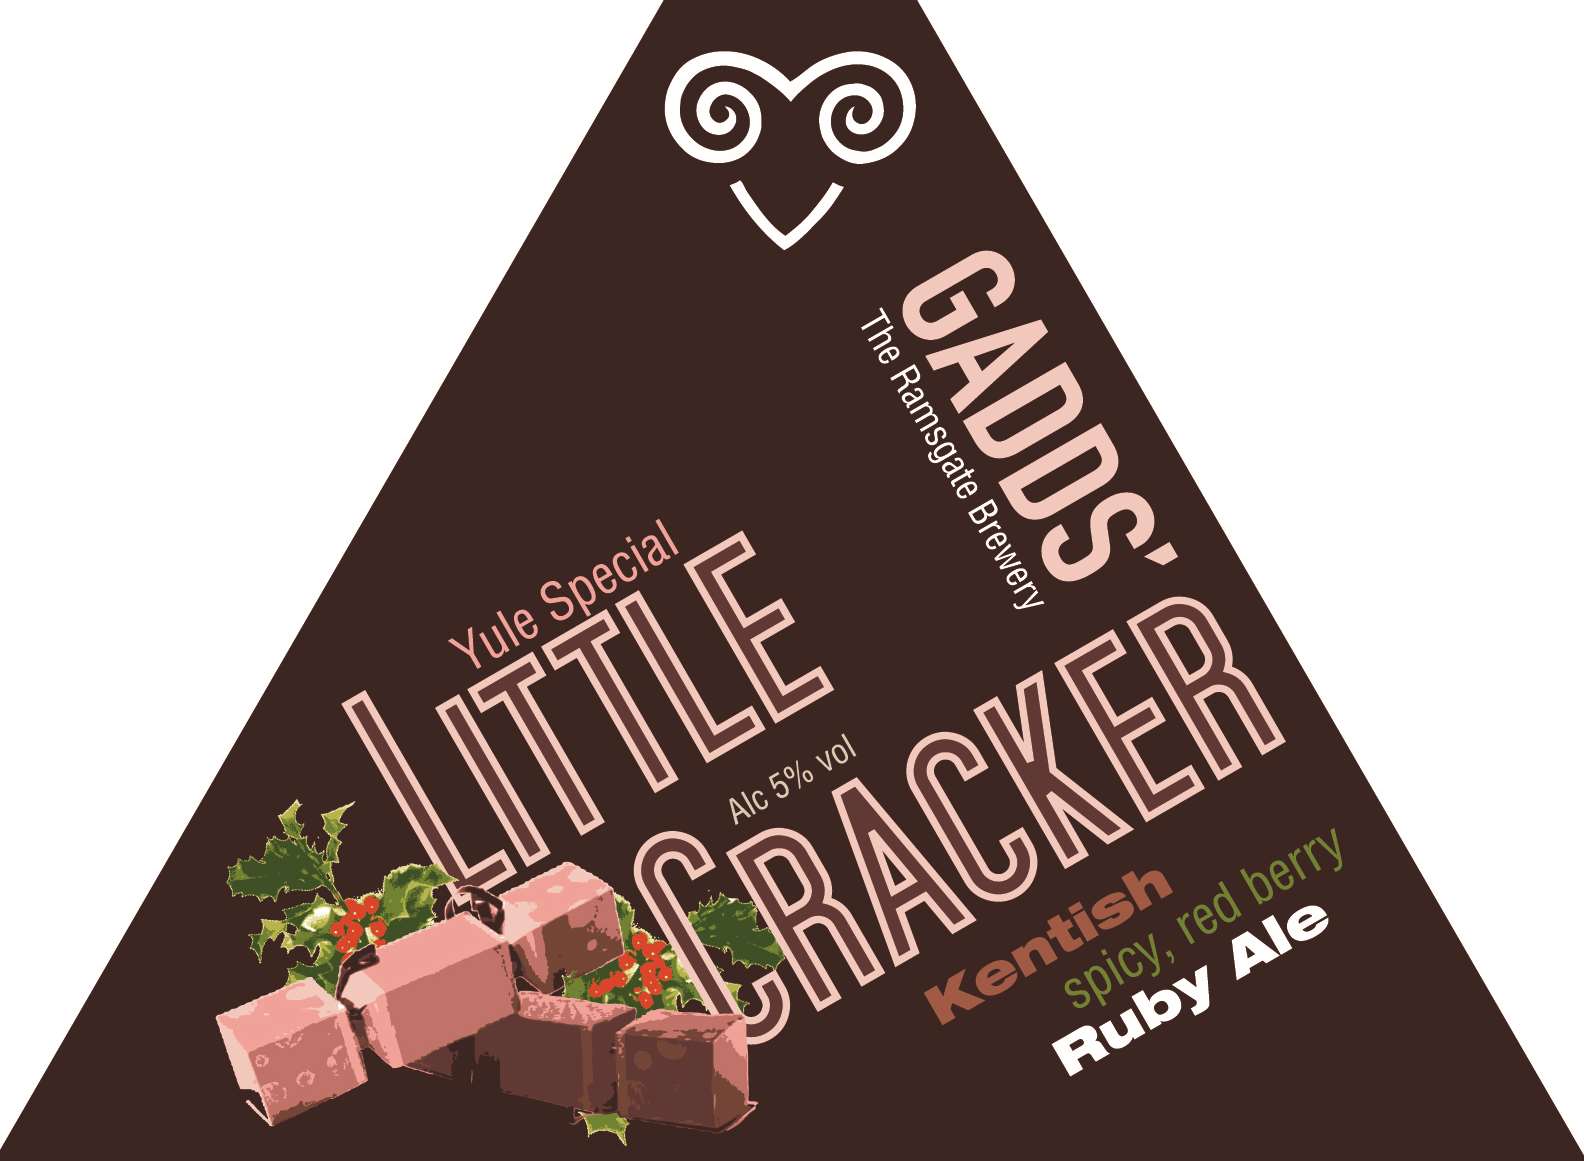 The Little Cracker is Ramsgate Brewery's Christmas special ale